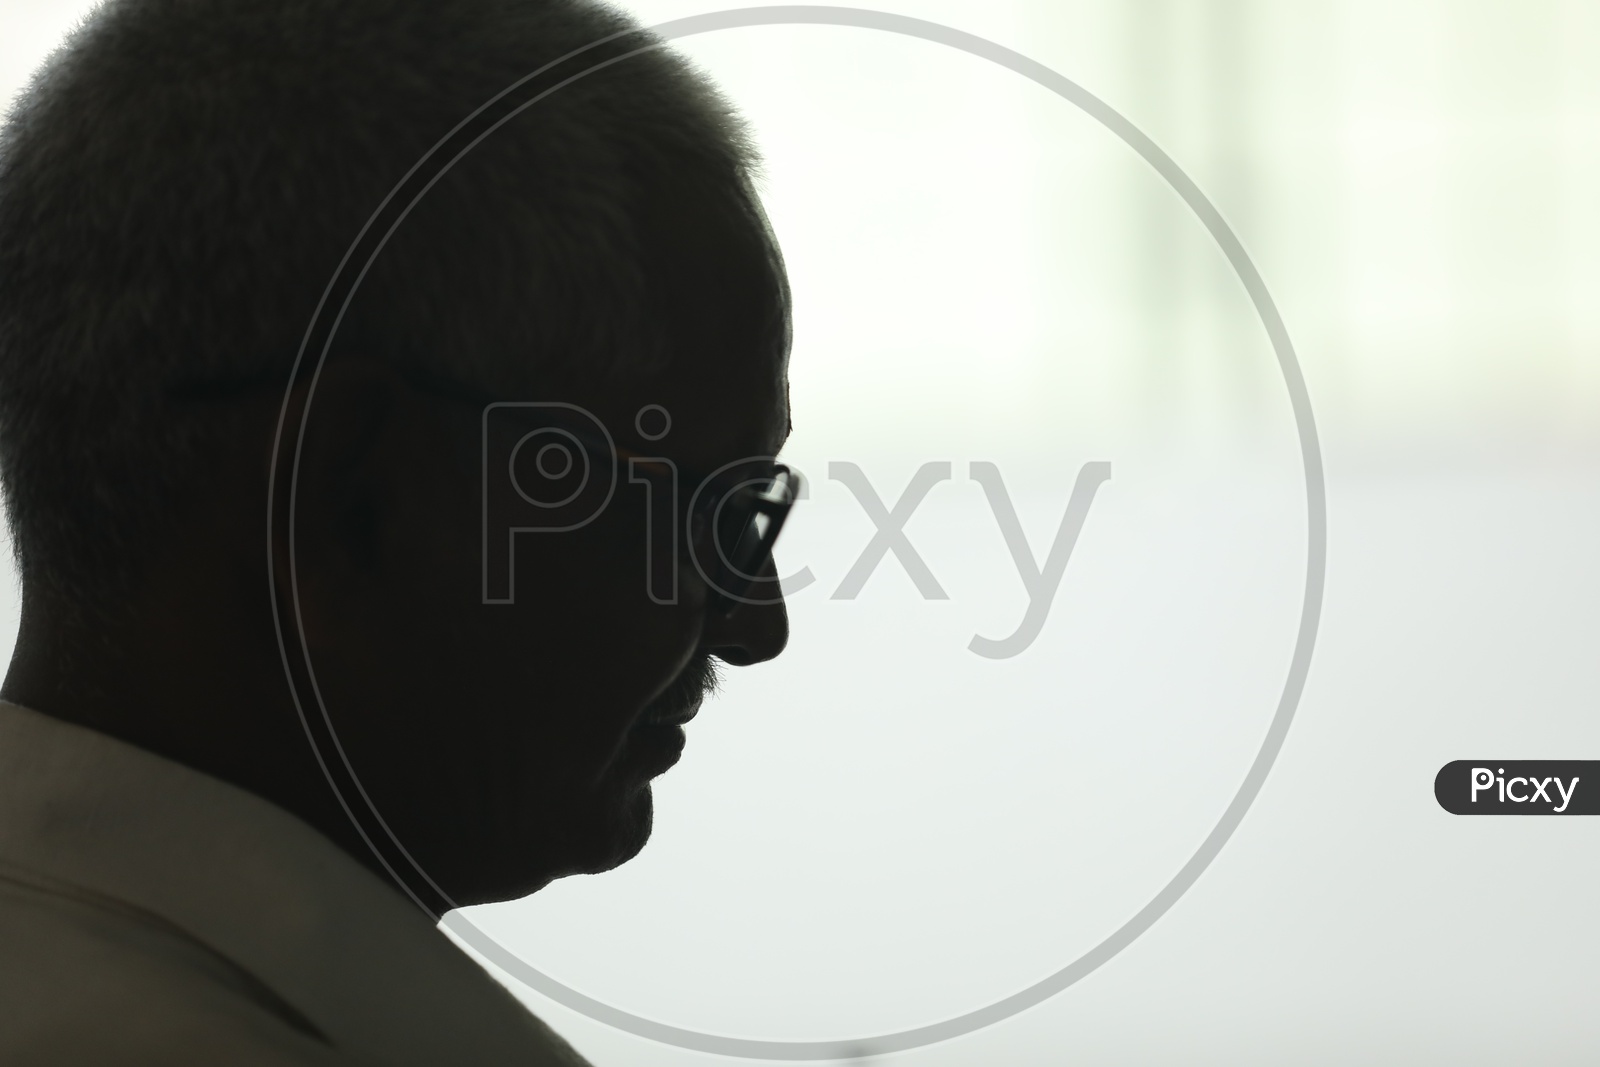 Silhouette Of a Thinking Indian Old Man Wearing Spectacles